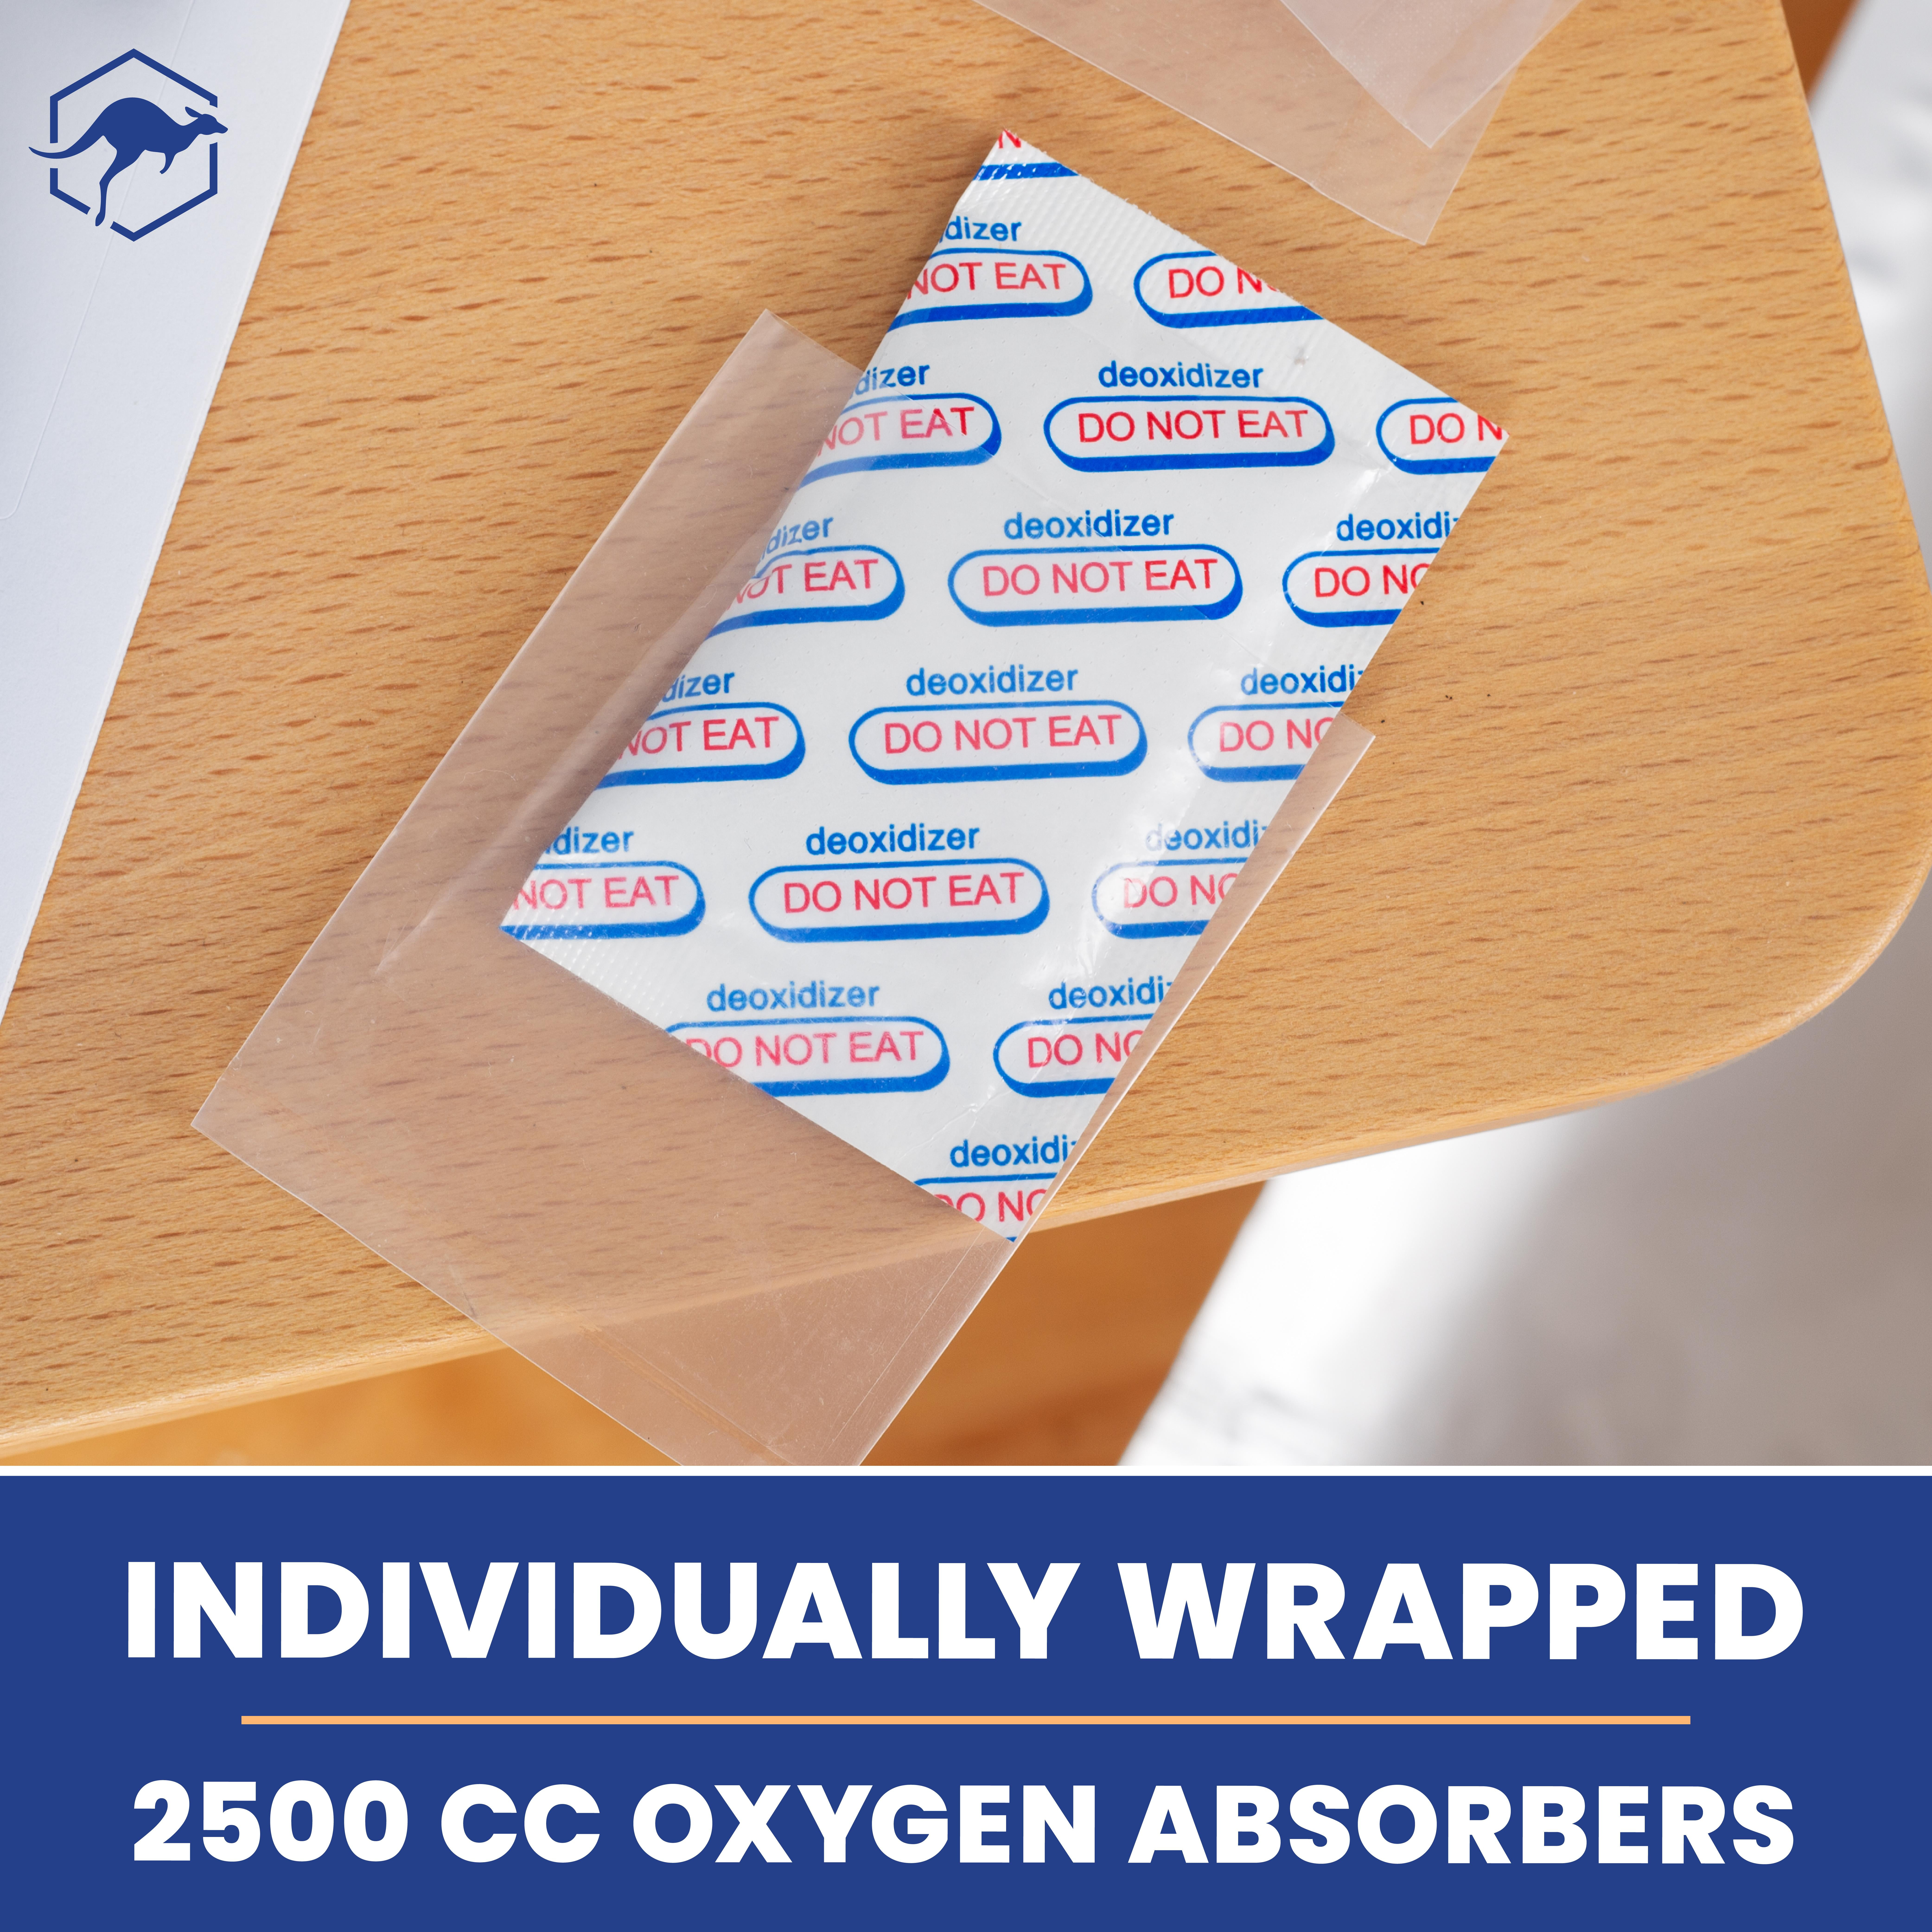 Wallaby 15X 5 Gallon Wallaby Mylar Bag Bundle - Silver (5 mil) with 20 Single Sealed Oxygen Absorbers & Labels - Resealable Zipper, FDA